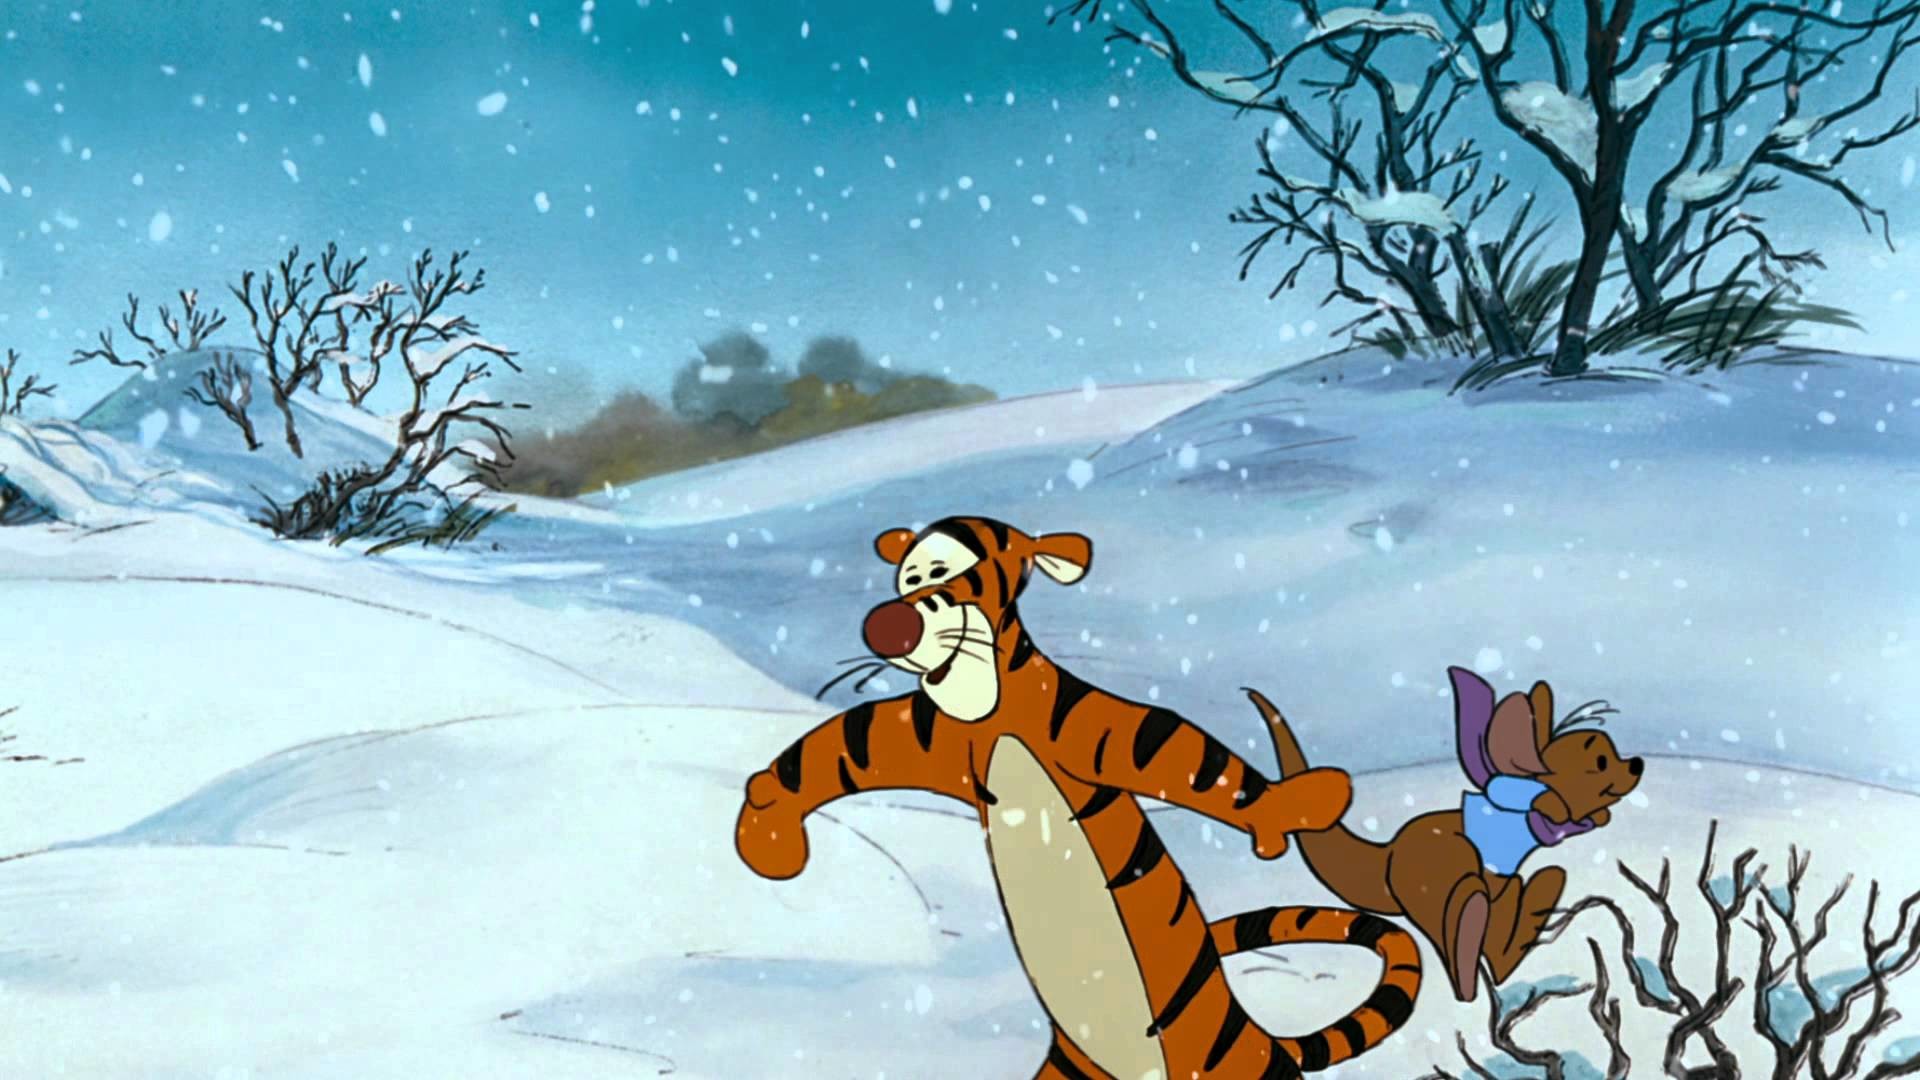 1920x1080 The Mini Adventures of Winnie the Pooh: Tigger Goes Ice Skating - YouTube